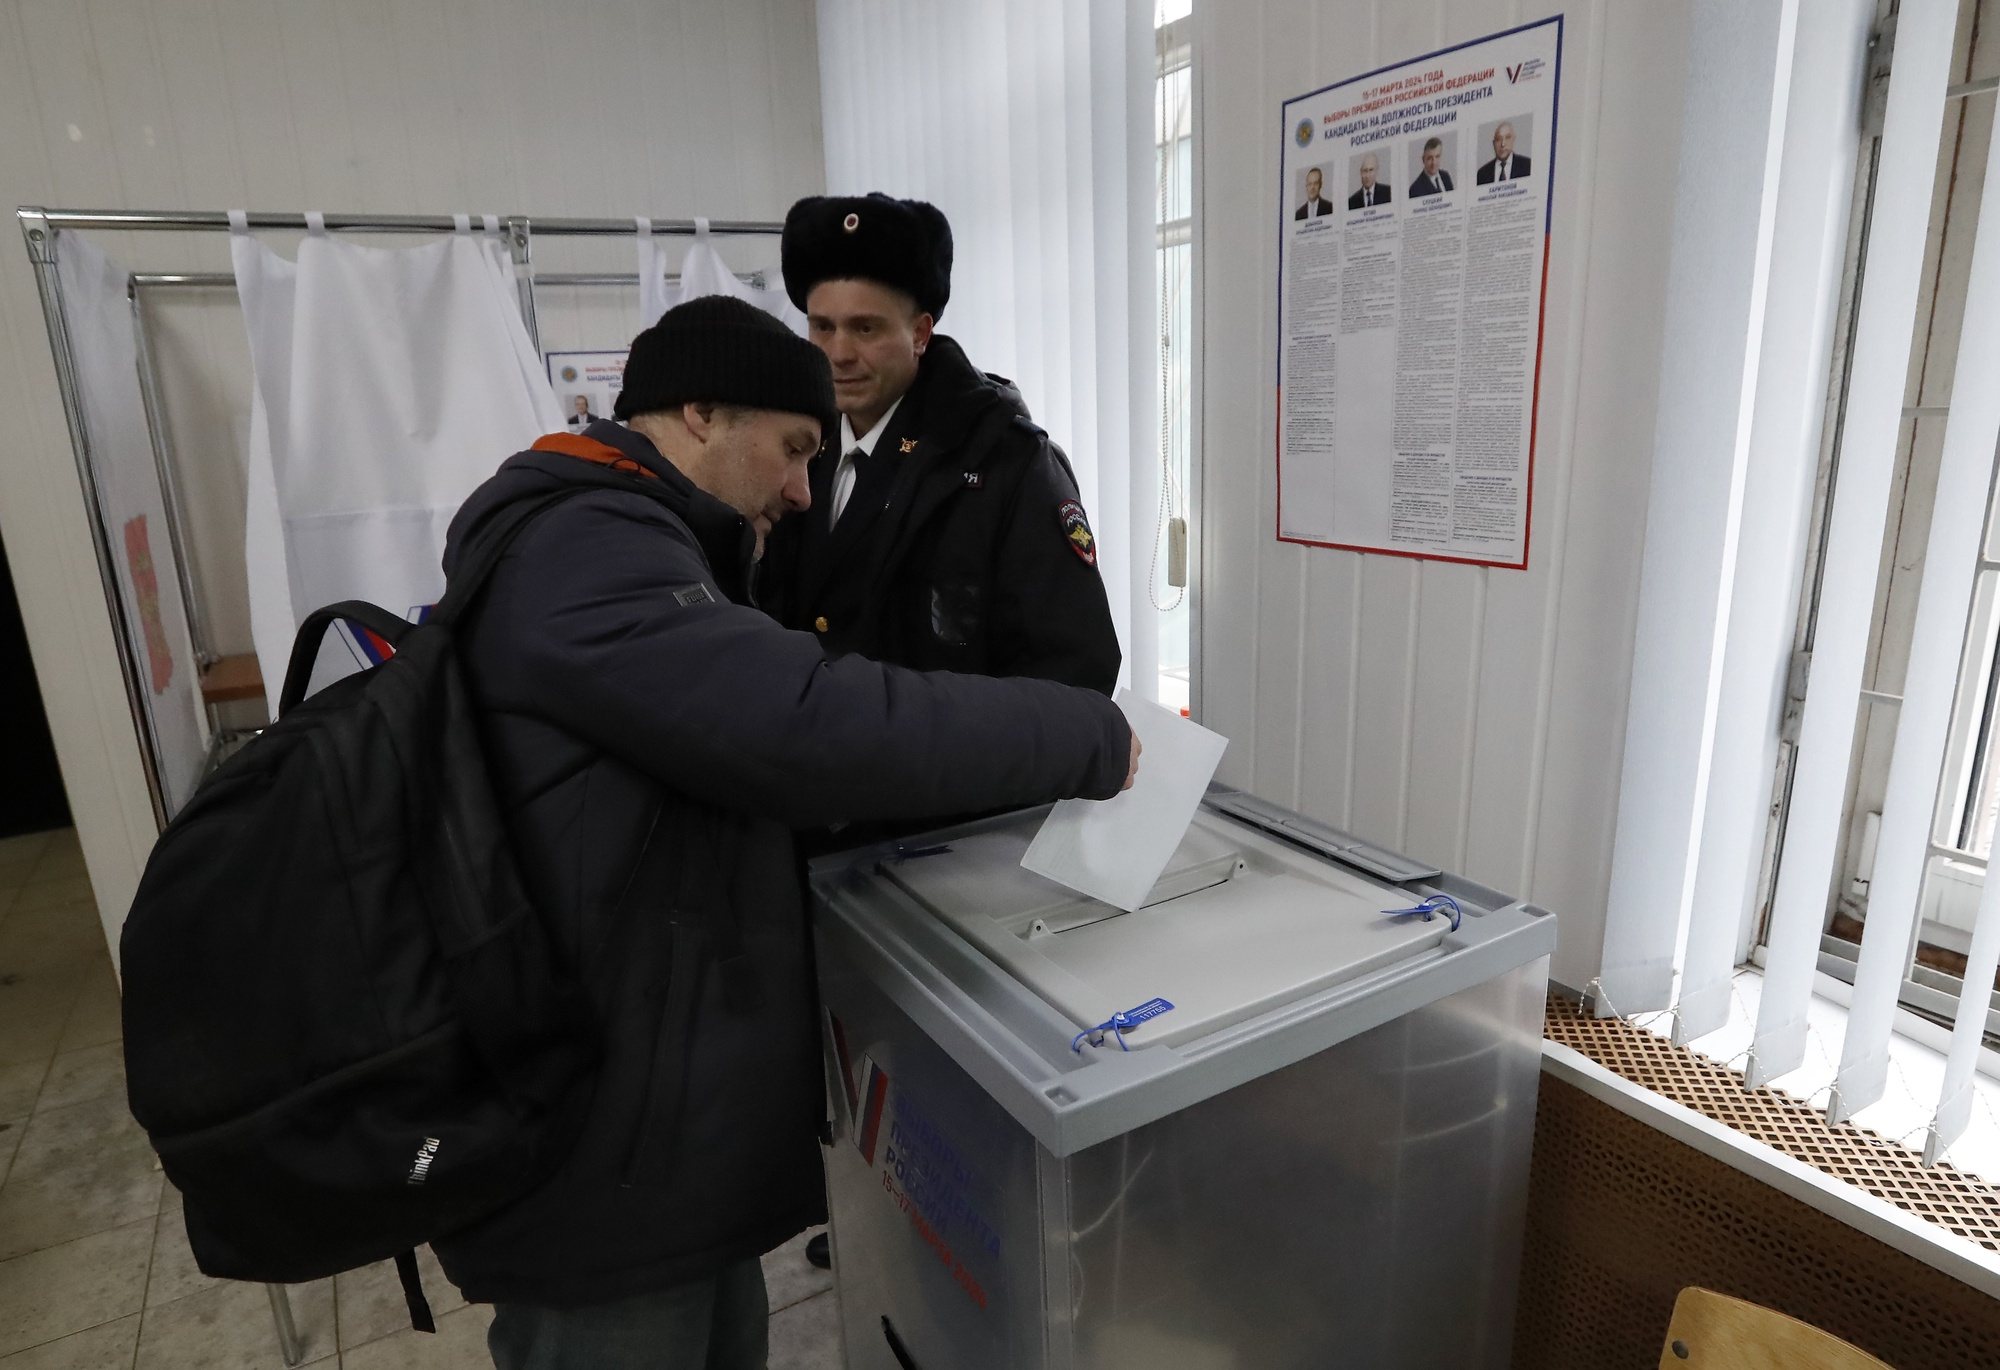 epa11224007 A man casts his ballot at a polling station in the village of Lyuban, Leningrad region, Russia, 16 March 2024. The Federation Council has scheduled presidential elections for March 17, 2024. Voting will last three days: March 15, 16 and 17. Four candidates registered by the Central Election Commission of the Russian Federation are vying for the post of head of state: Leonid Slutsky, Nikolai Kharitonov, Vladislav Davankov and Vladimir Putin.  EPA/ANATOLY MALTSEV